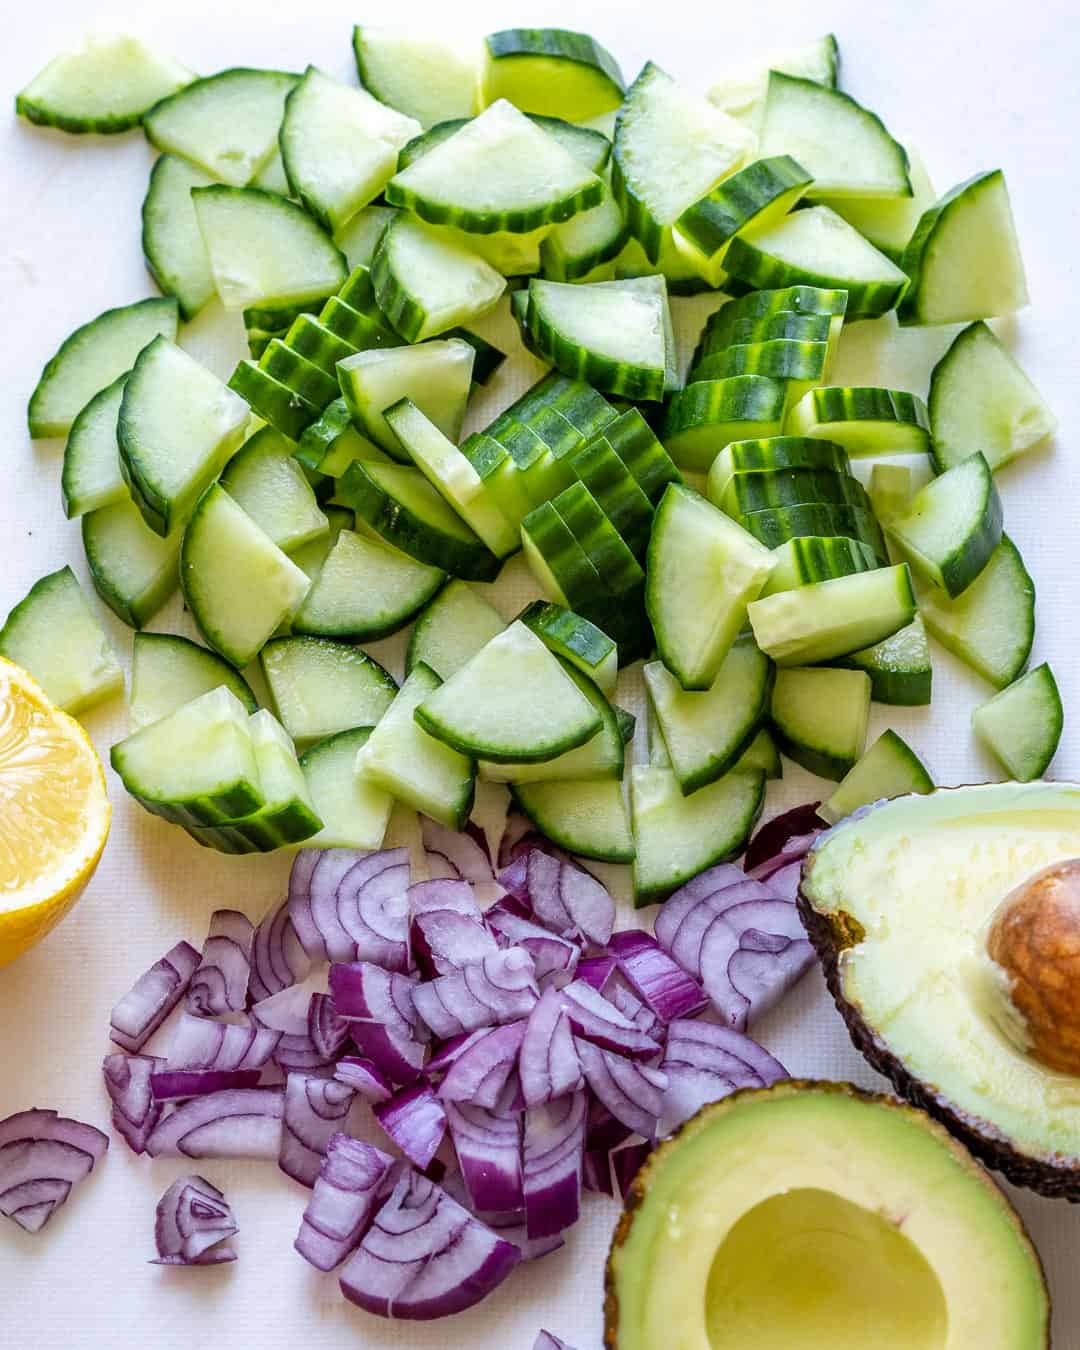 Chopped cucumbers, onions, and avocado on cutting board